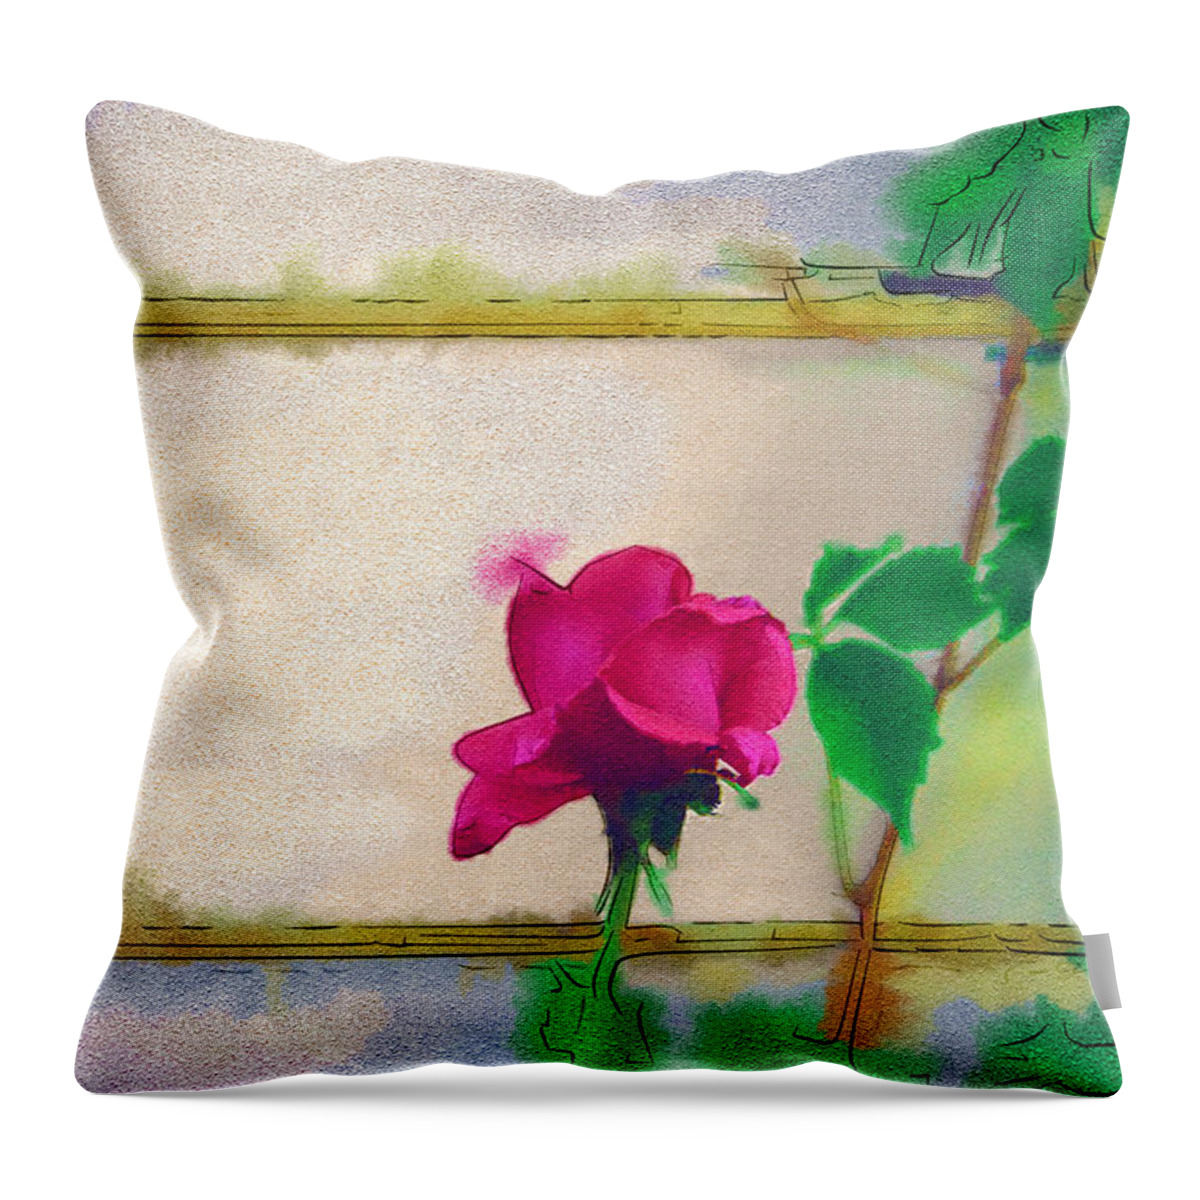 Rose Throw Pillow featuring the digital art Garden Rose by Holly Ethan